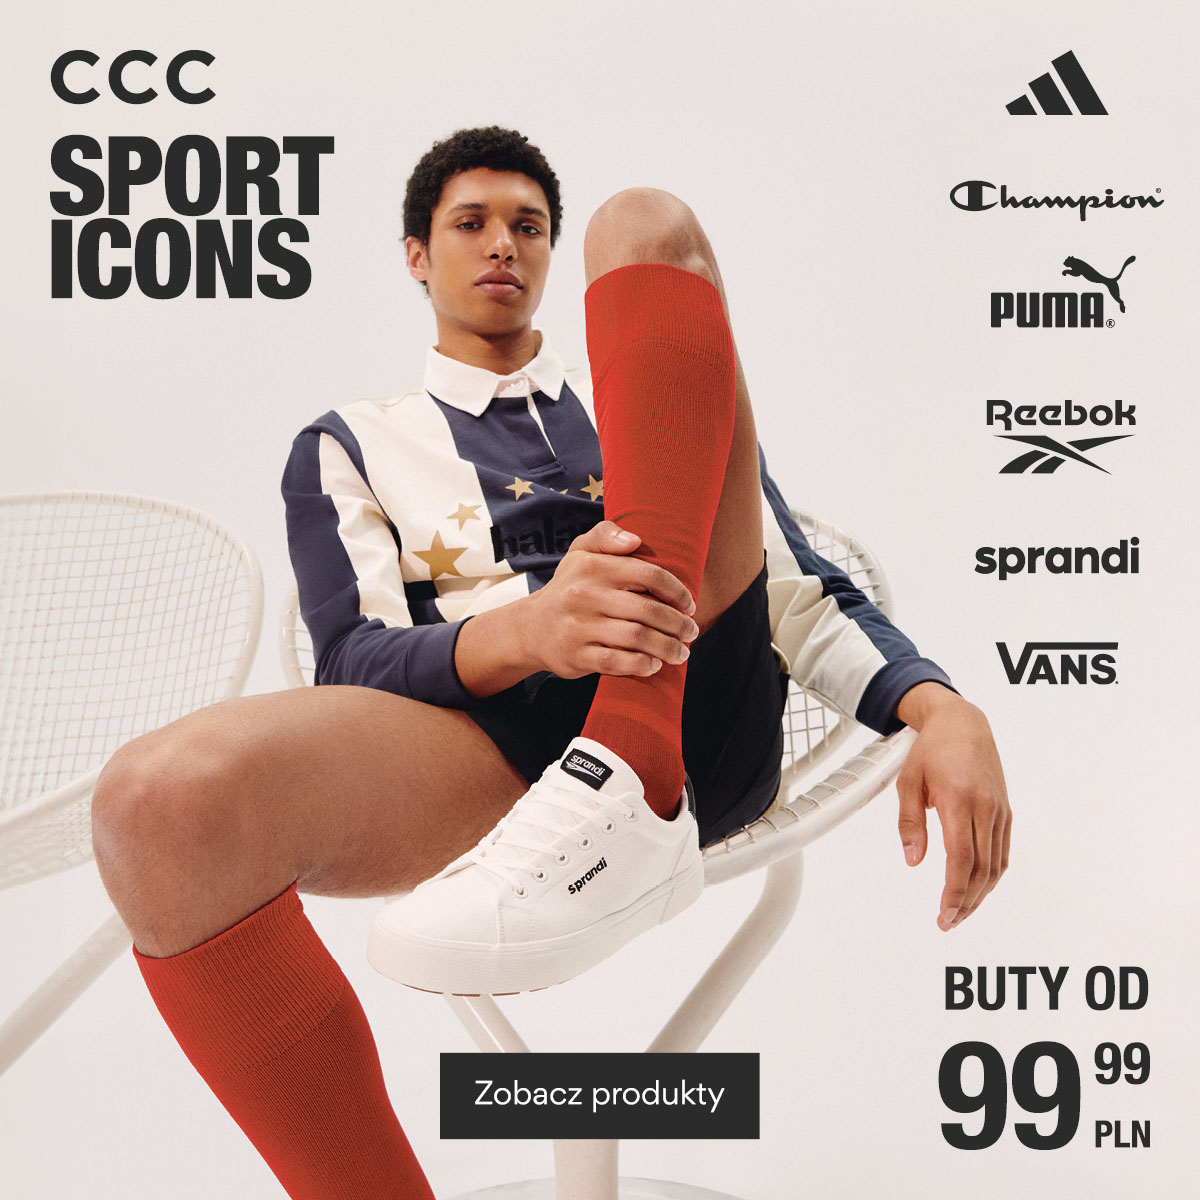 CCC: sport icons